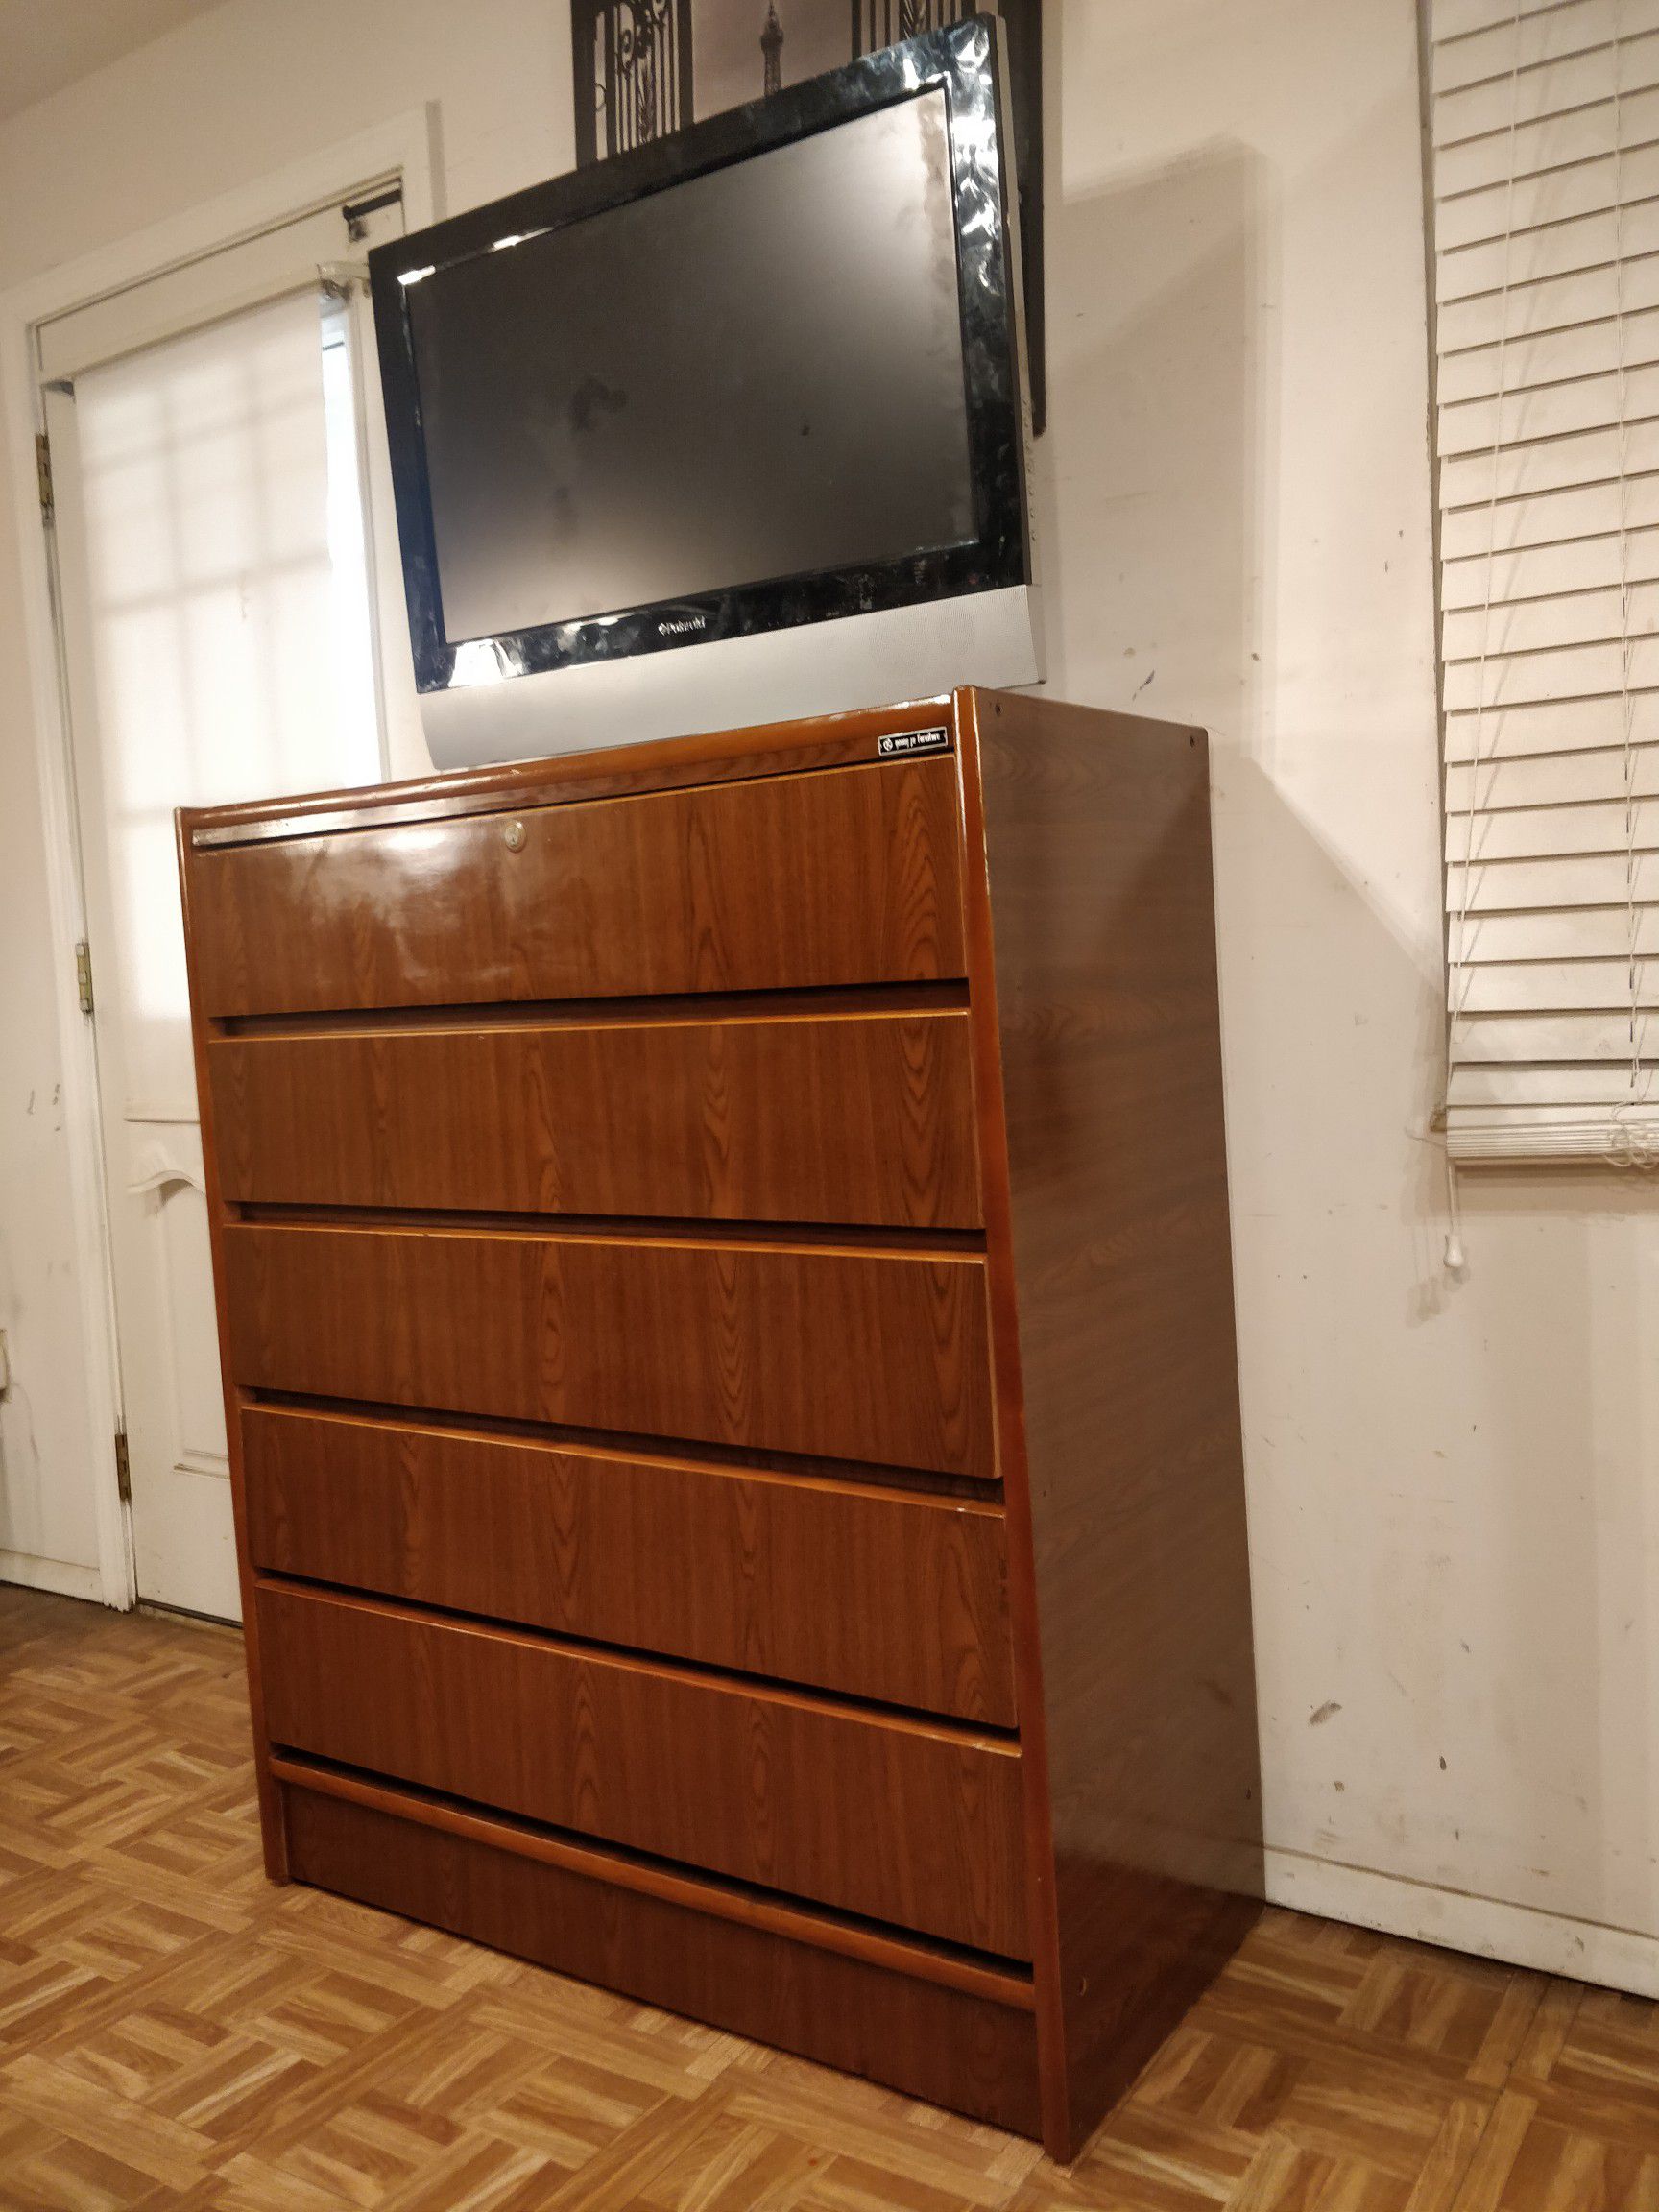 Nice dresser/TV stand with big 5 drawers in good condition, all drawers working well, dovetail drawers. L39"*W17.5"*H47"